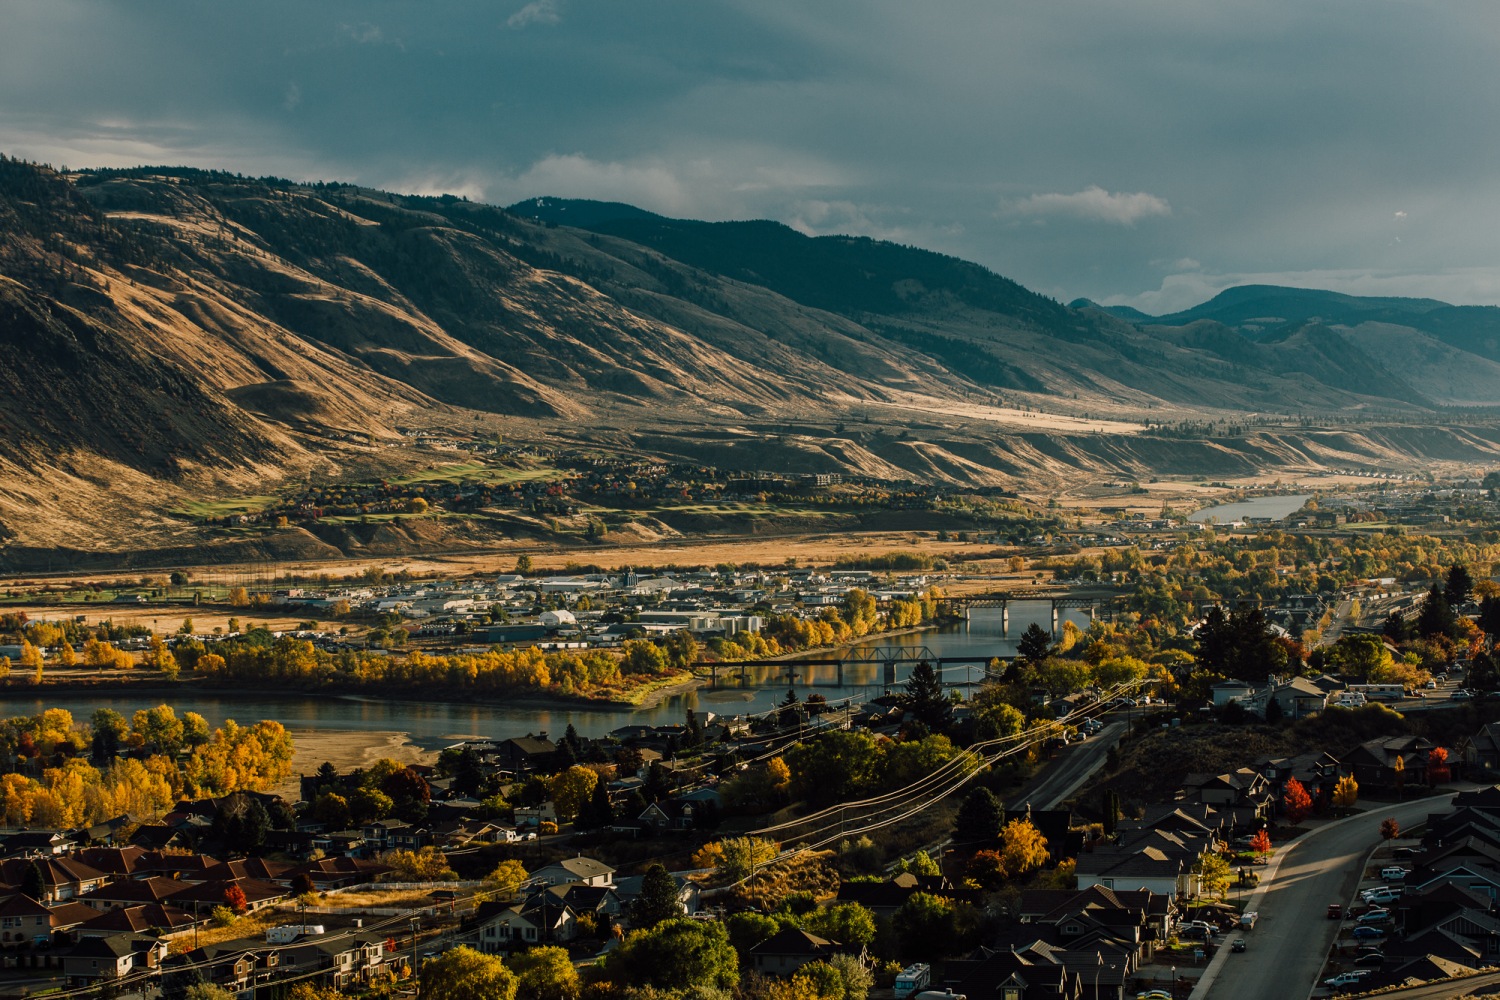 Kamloops, British Columbia, Ranks #9 in the list of Canada’s Most Dangerous Cities